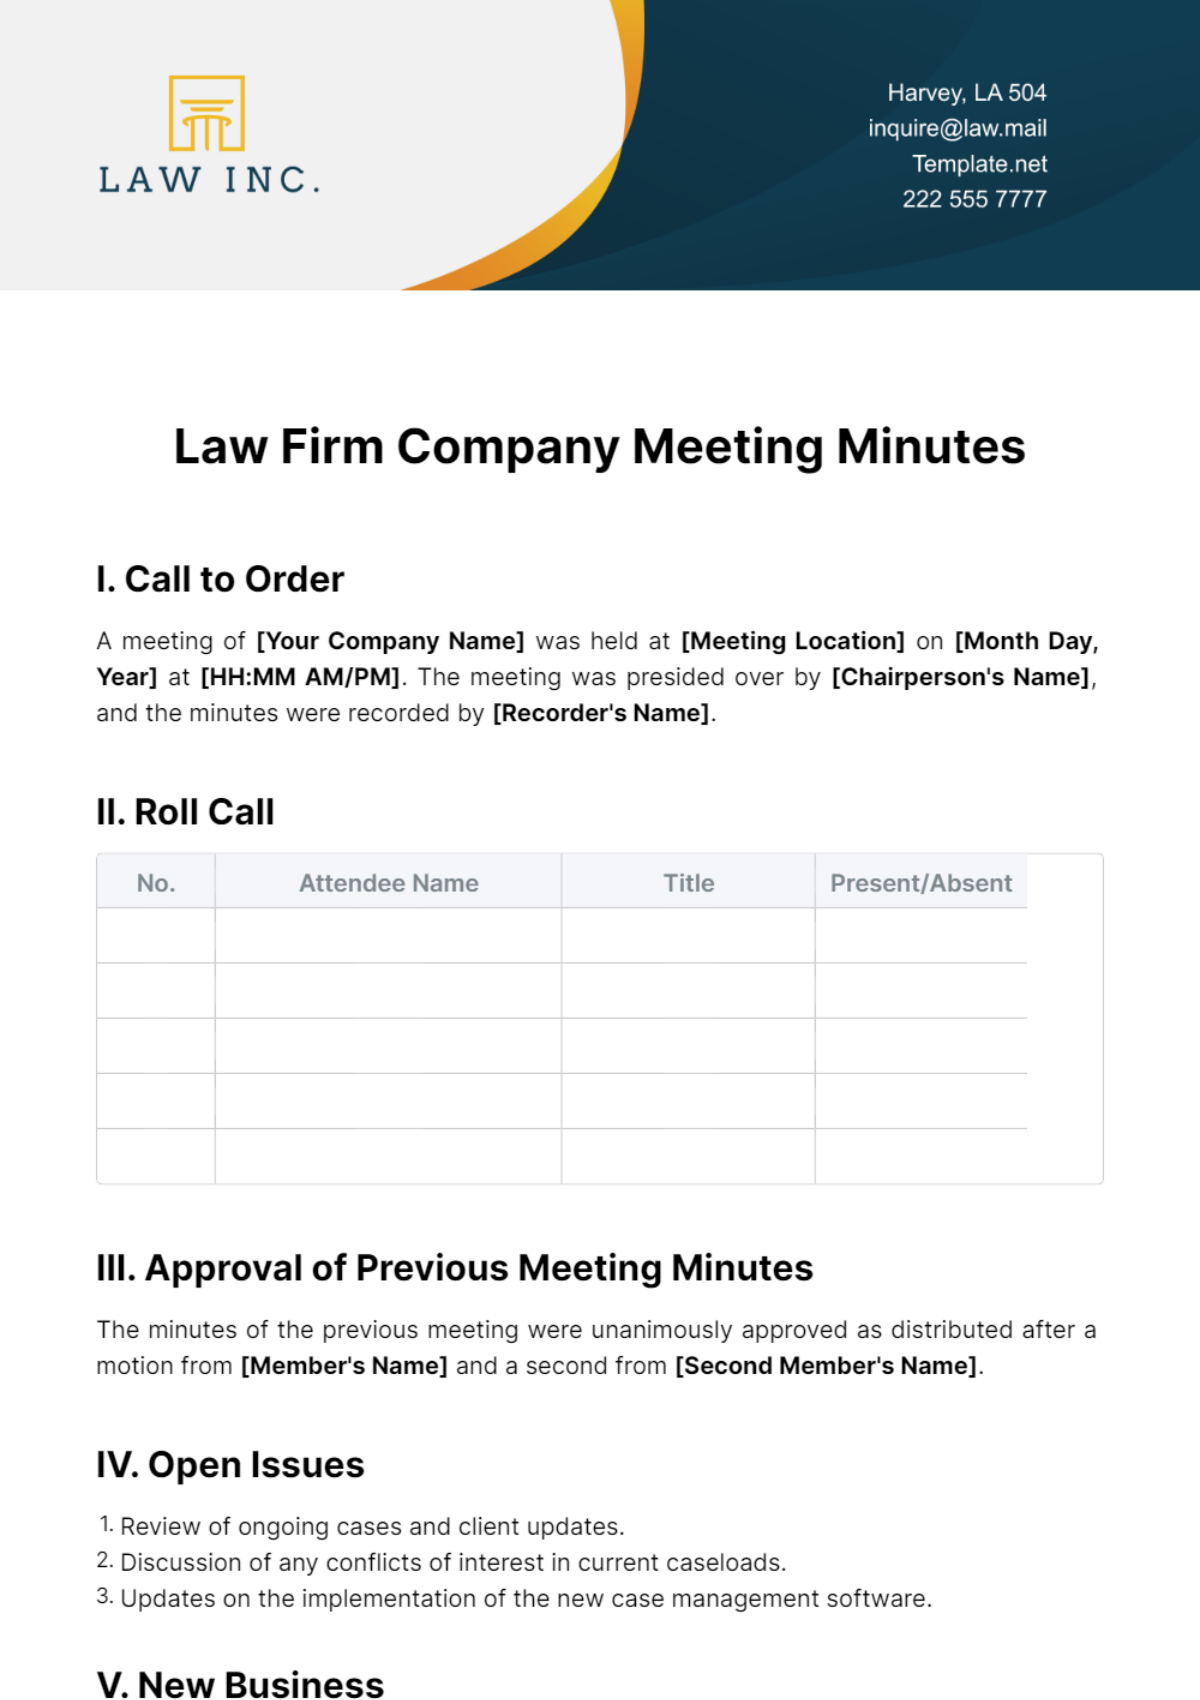 Law Firm Company Meeting Minutes Template